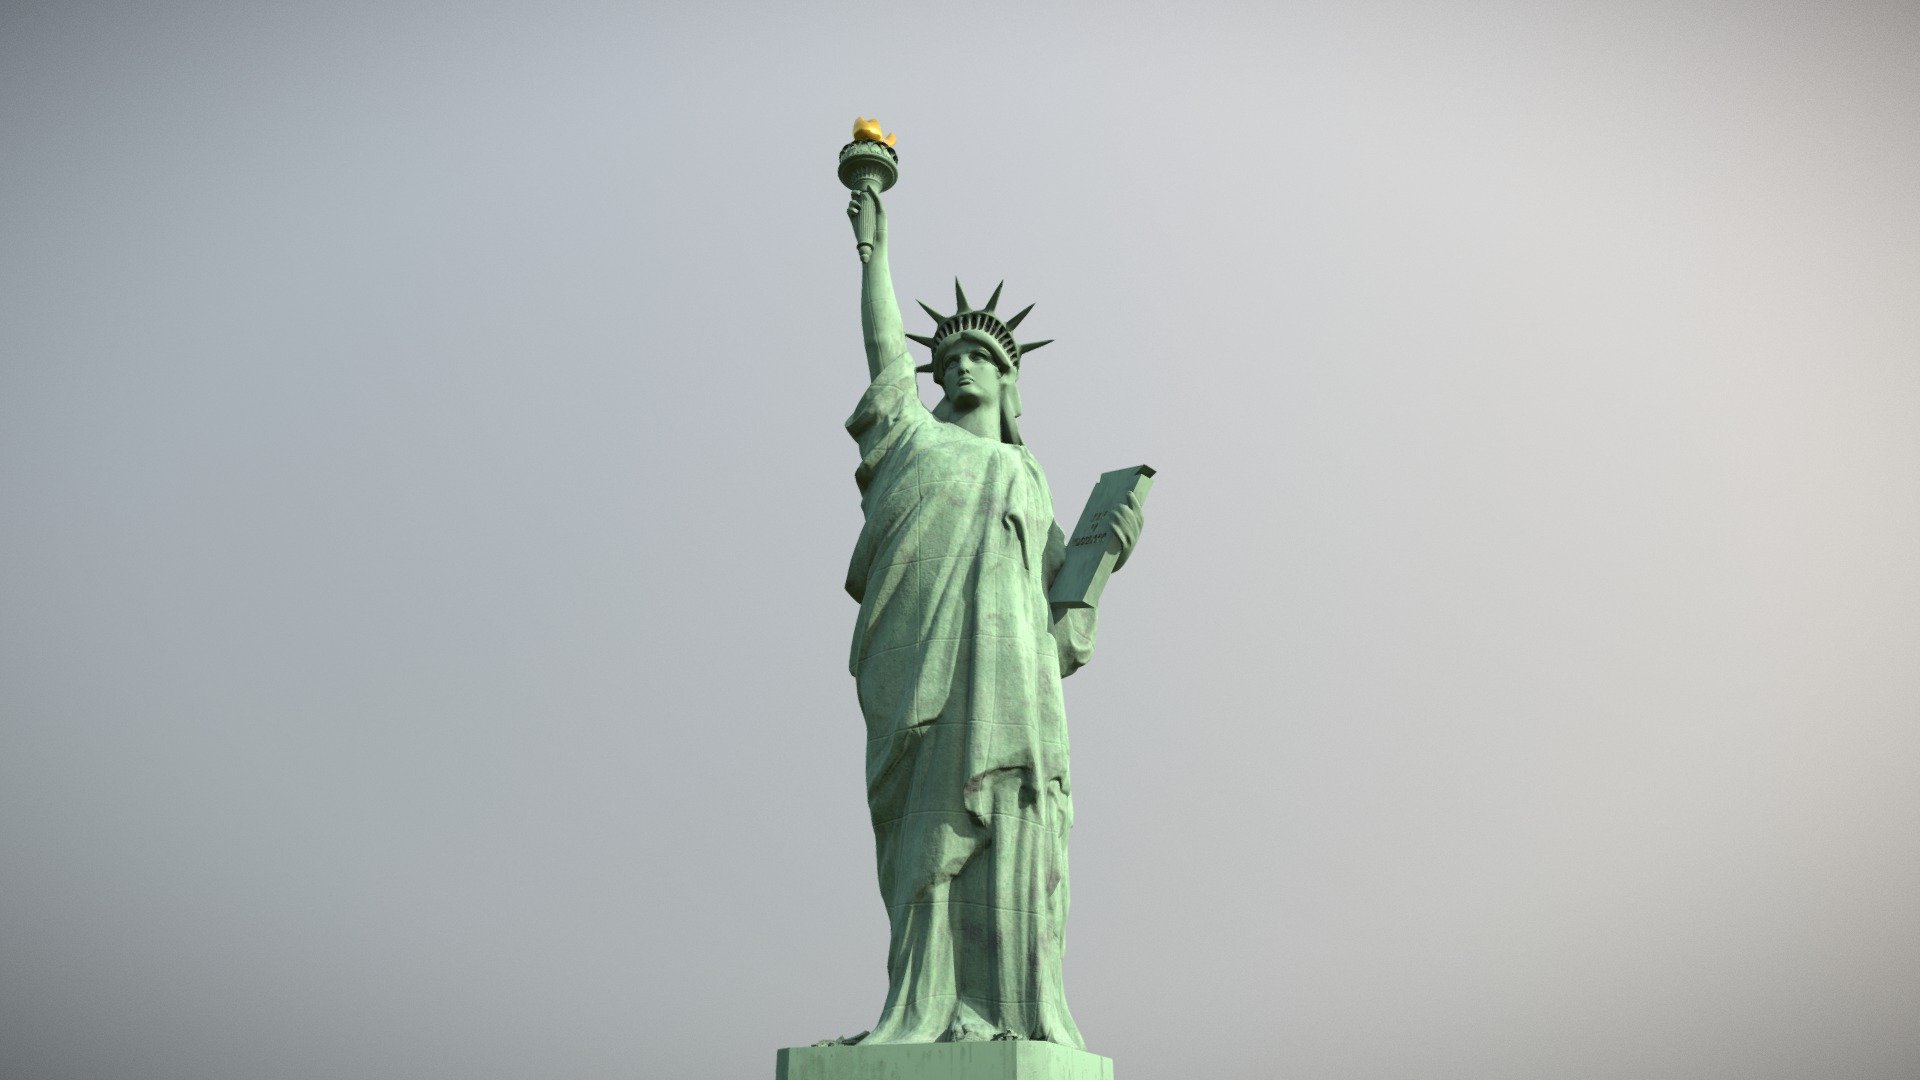 This American symbol has been recreated in 3D using ZBrush and Maya. Highly detailed and textured for PBR using Substance Painter. Its 100% UV unwrapped and game ready 3d model